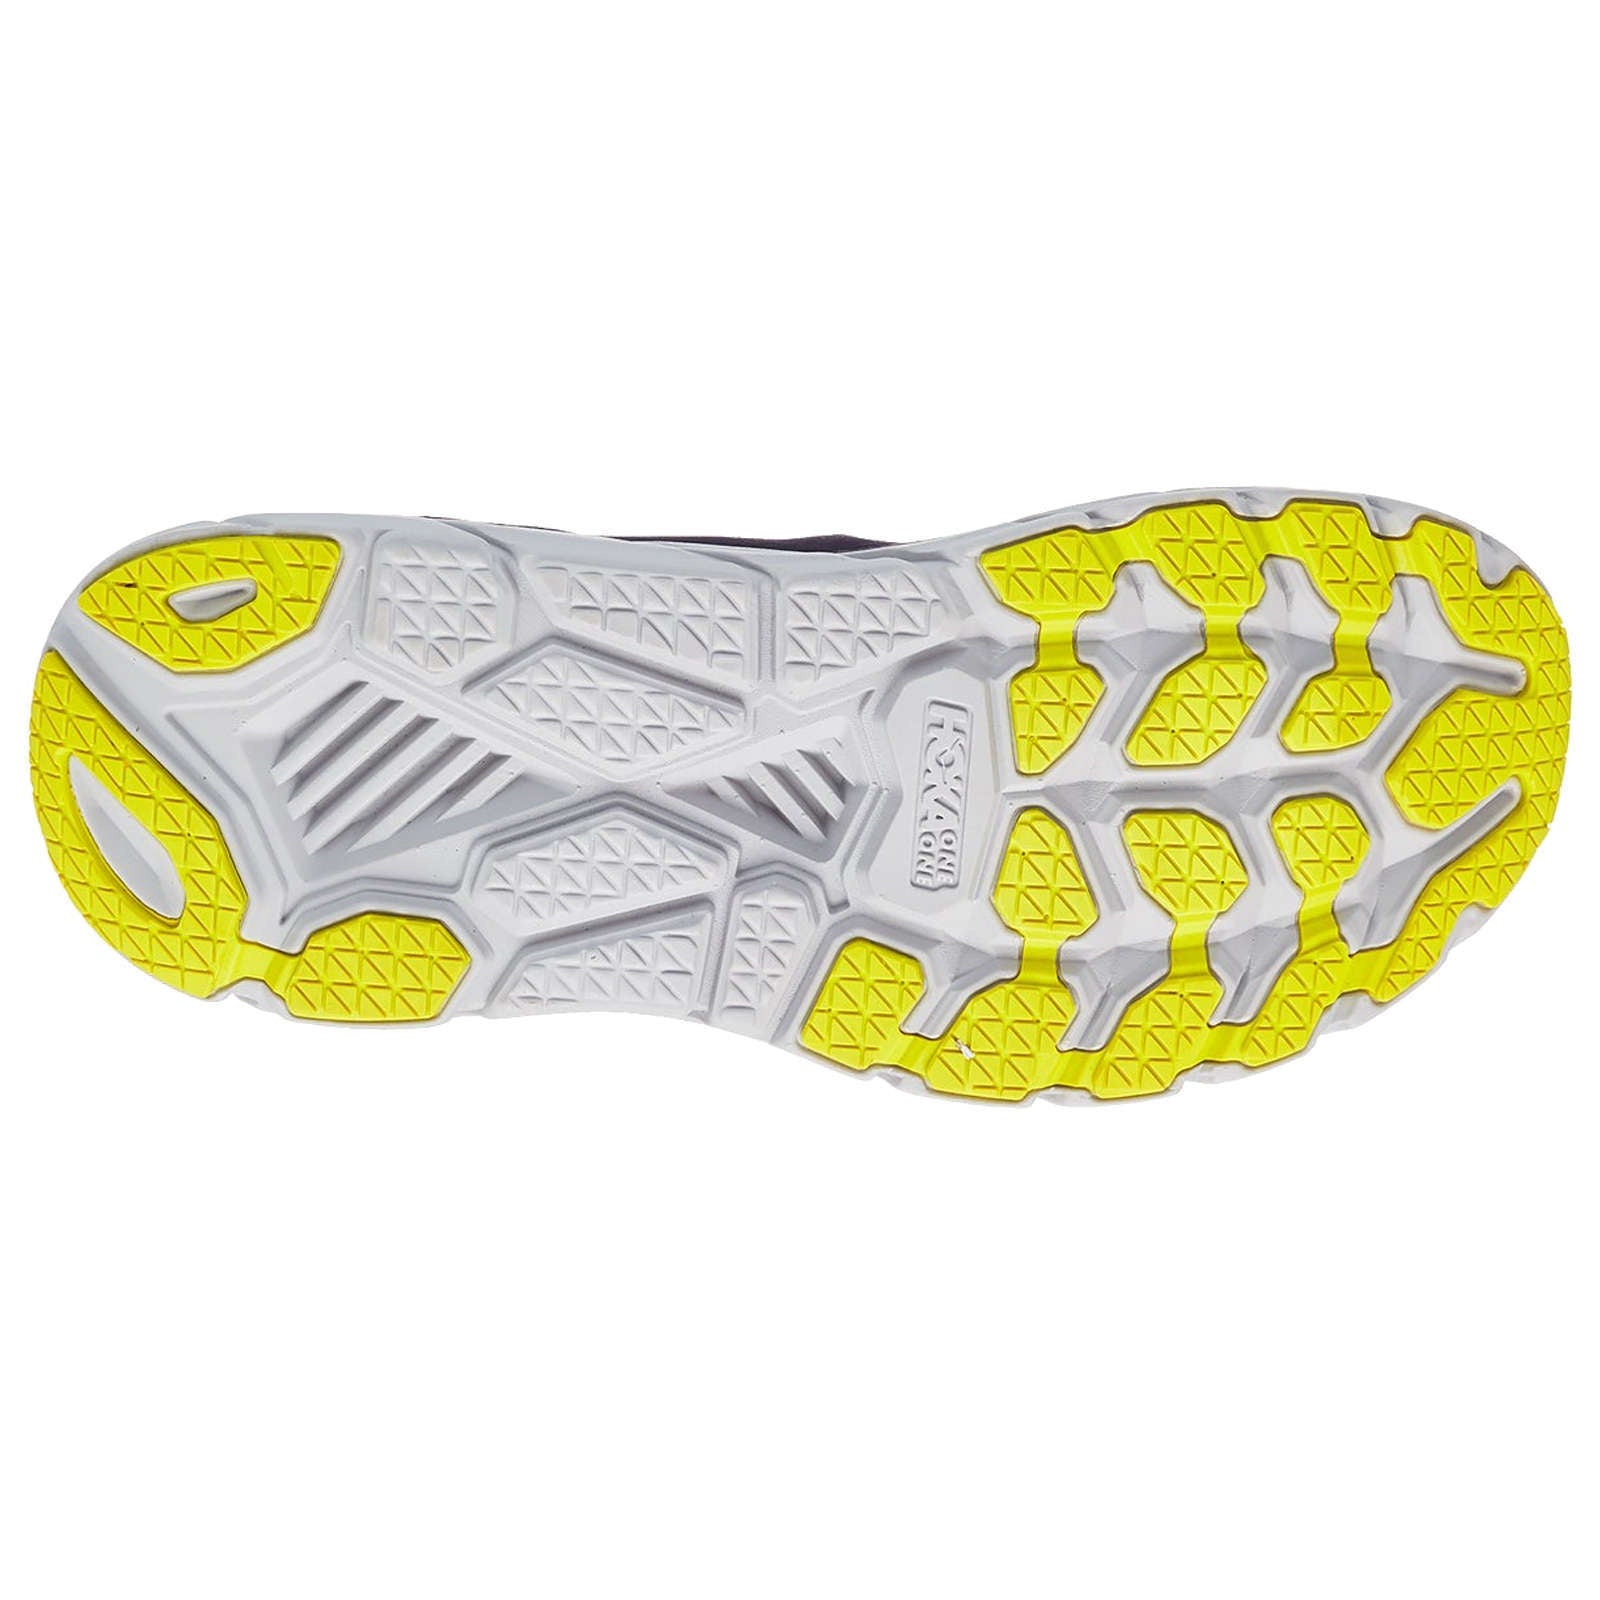 Hoka One One Clifton 7 Mesh Men's Low-Top Road Running Trainers#color_odyssey grey evening primrose